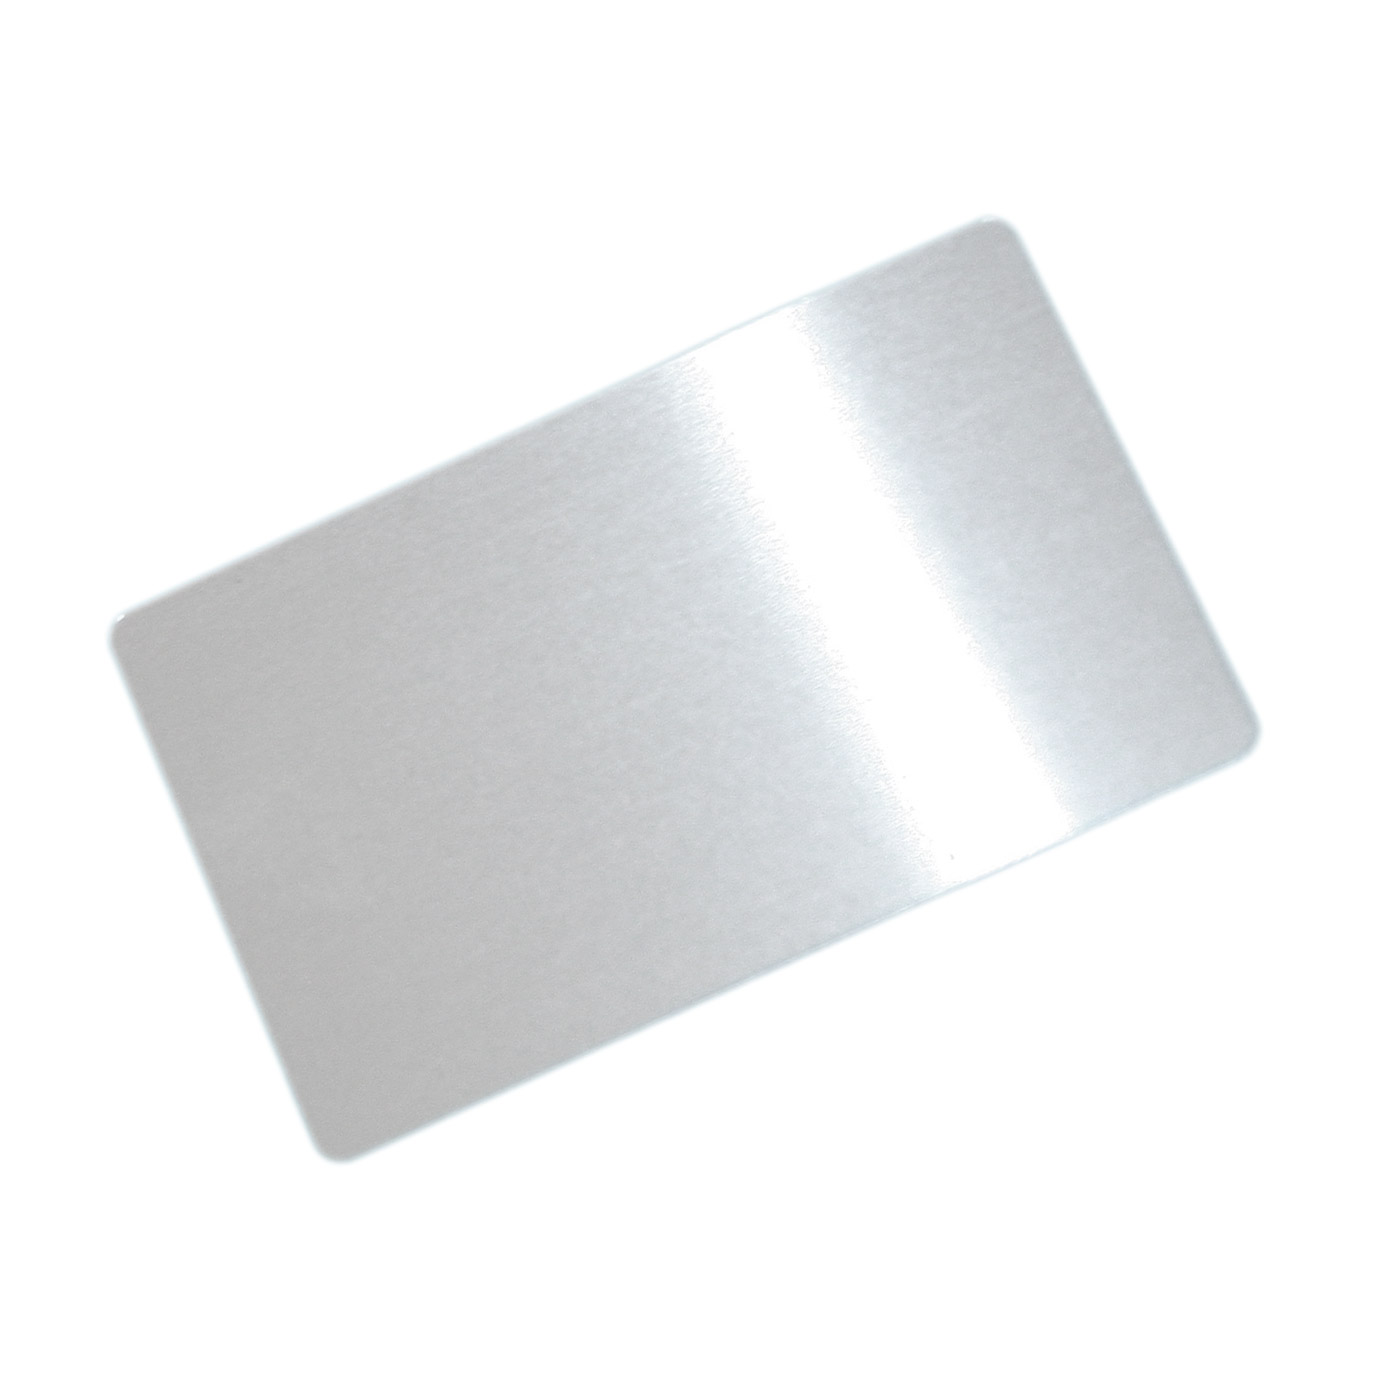 Aluminium business card for sublimation overprint - silver Dimension: 8,5 x  5,4 cm Colour: silver Quantity in package: 100